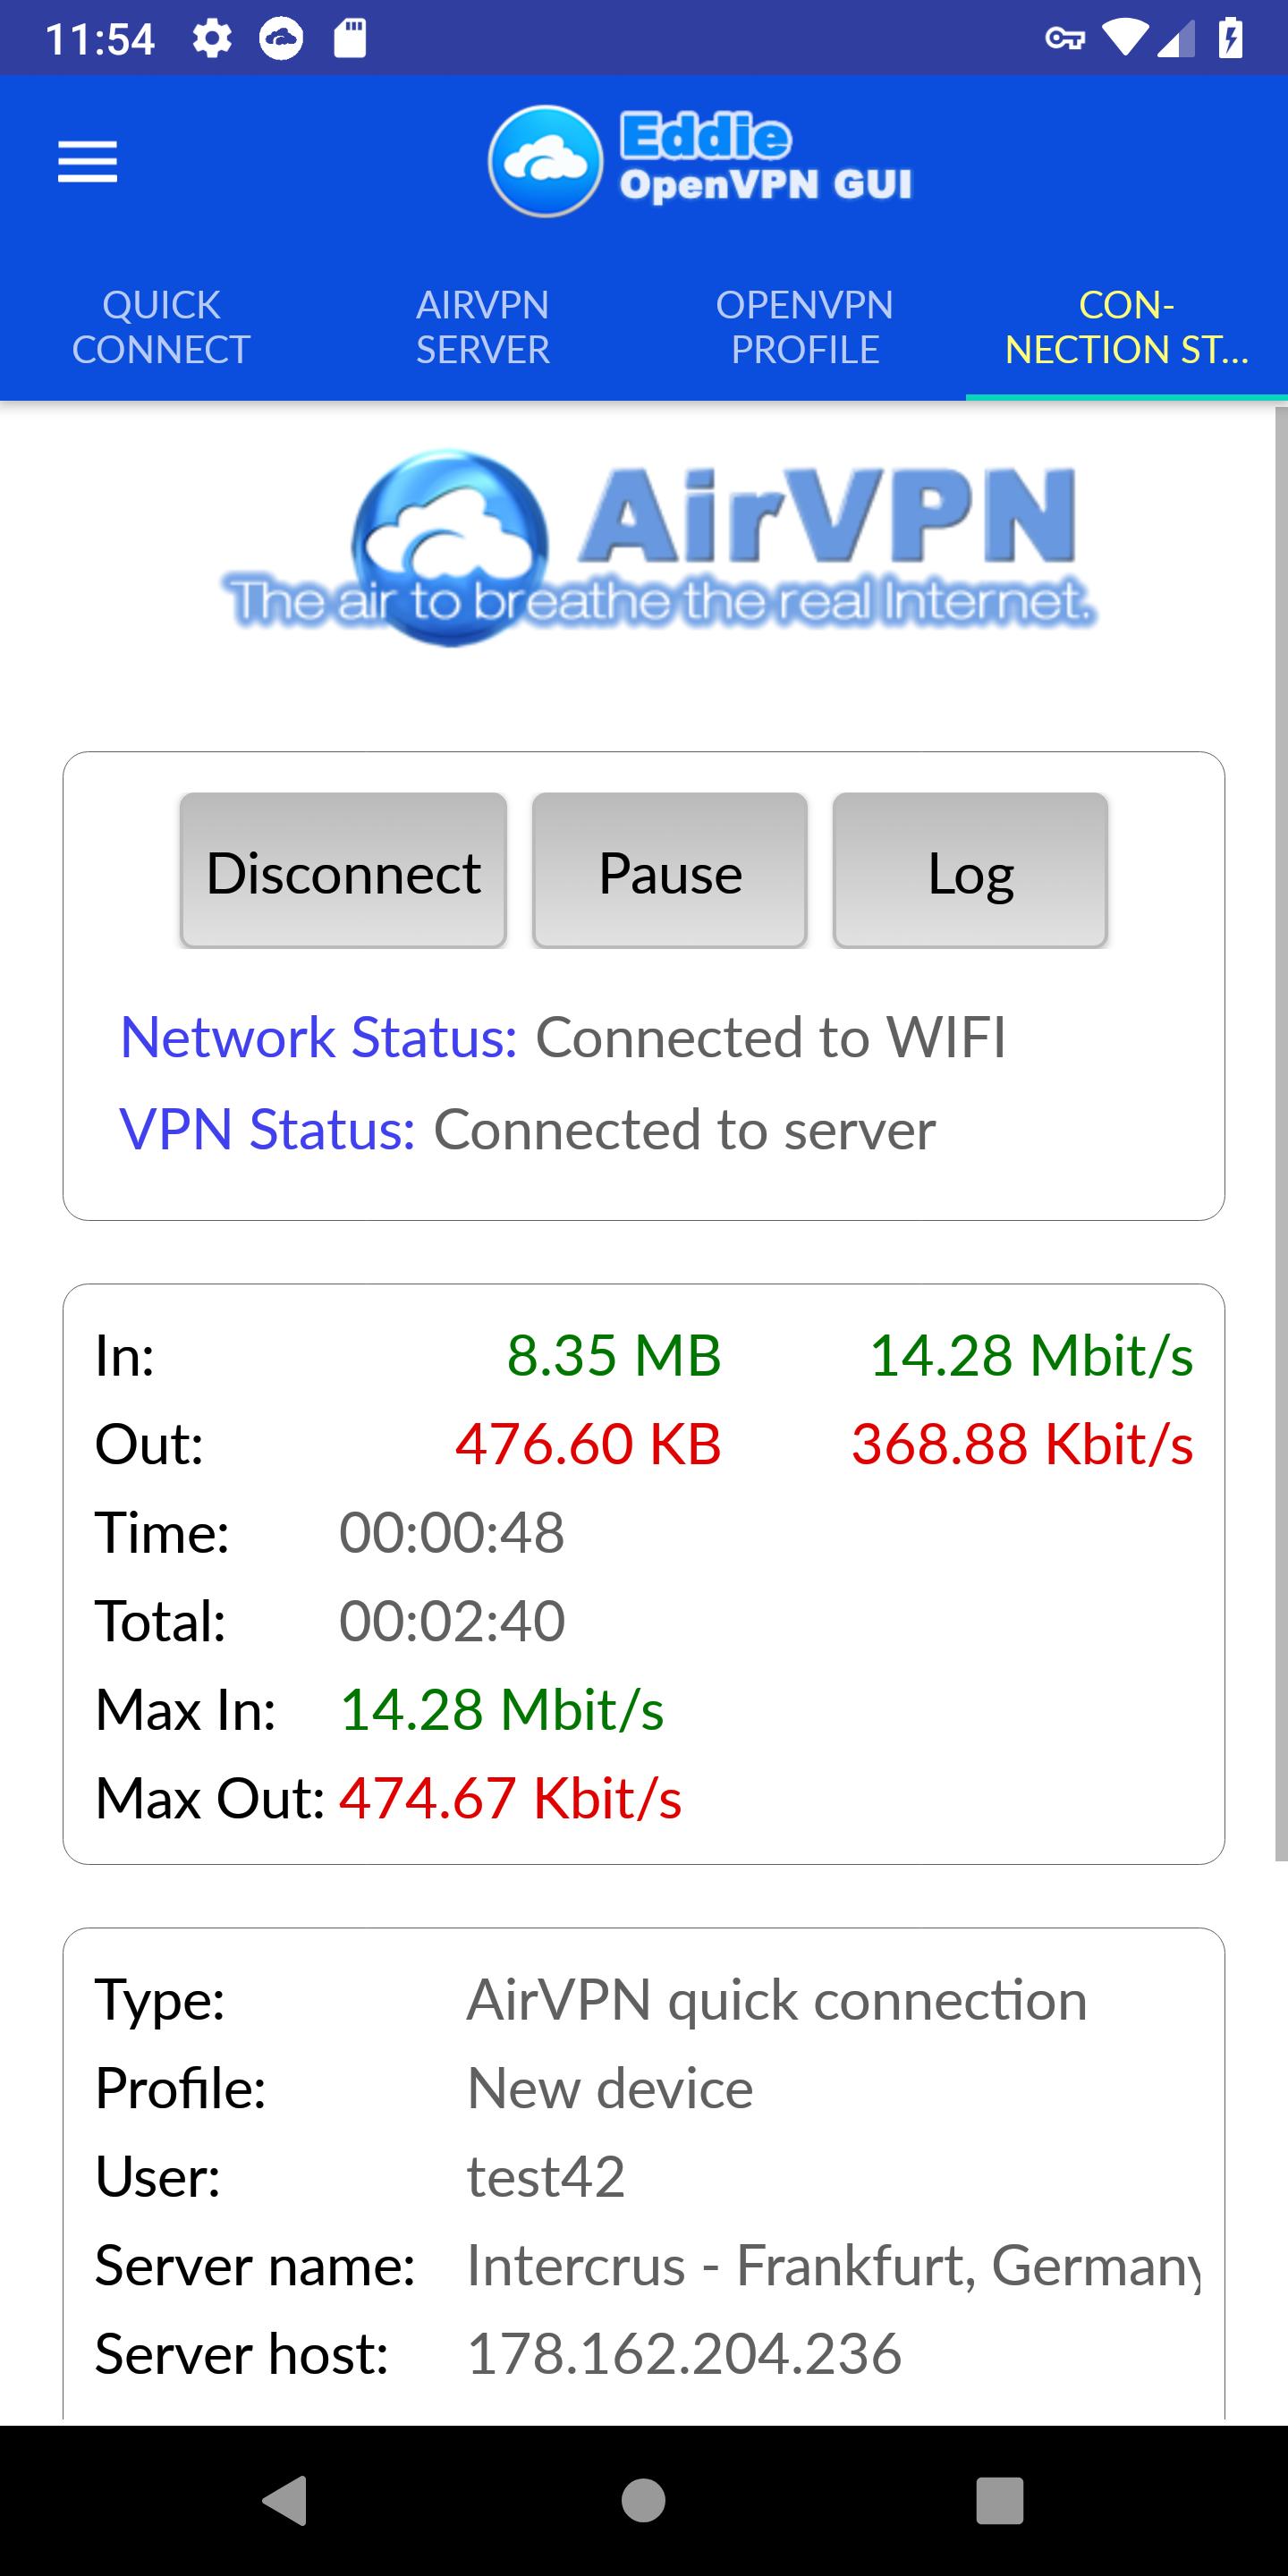 Eddie - AirVPN official OpenVPN GUI for Android - APK Download